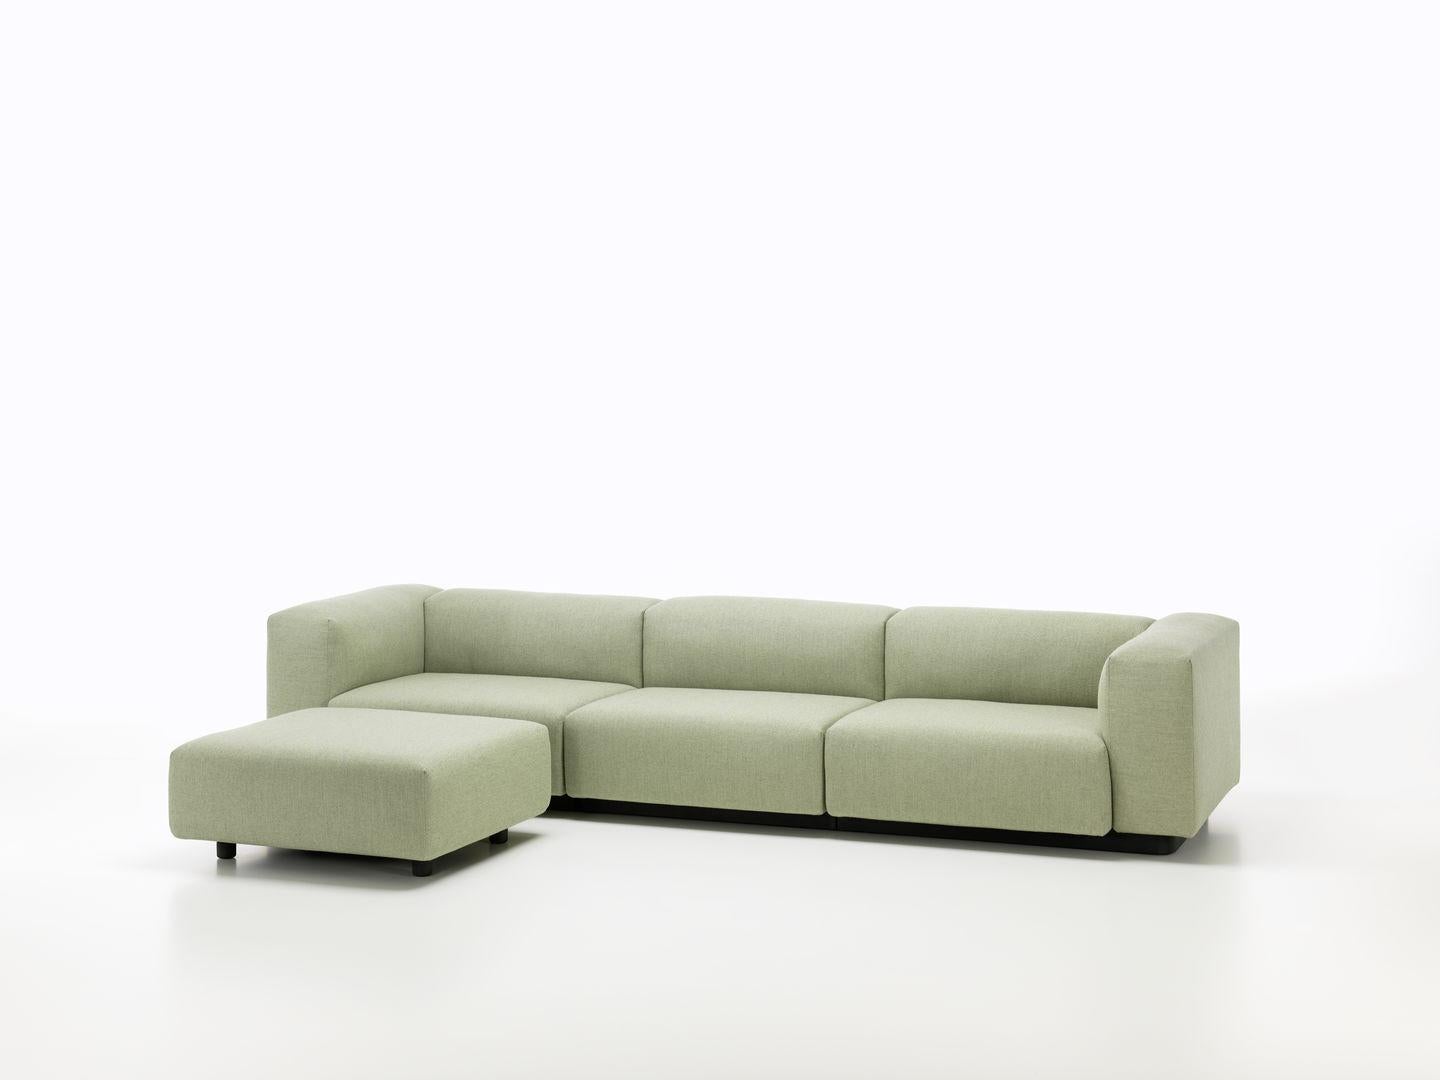 Sofa designed by Jasper Morrison in 2016.
Manufactured by Vitra, Switzerland.

The Soft Modular sofa is Jasper Morrison's updated interpretation of what has become a modern classic: the low-slung modular sofa with a decidedly horizontal emphasis.